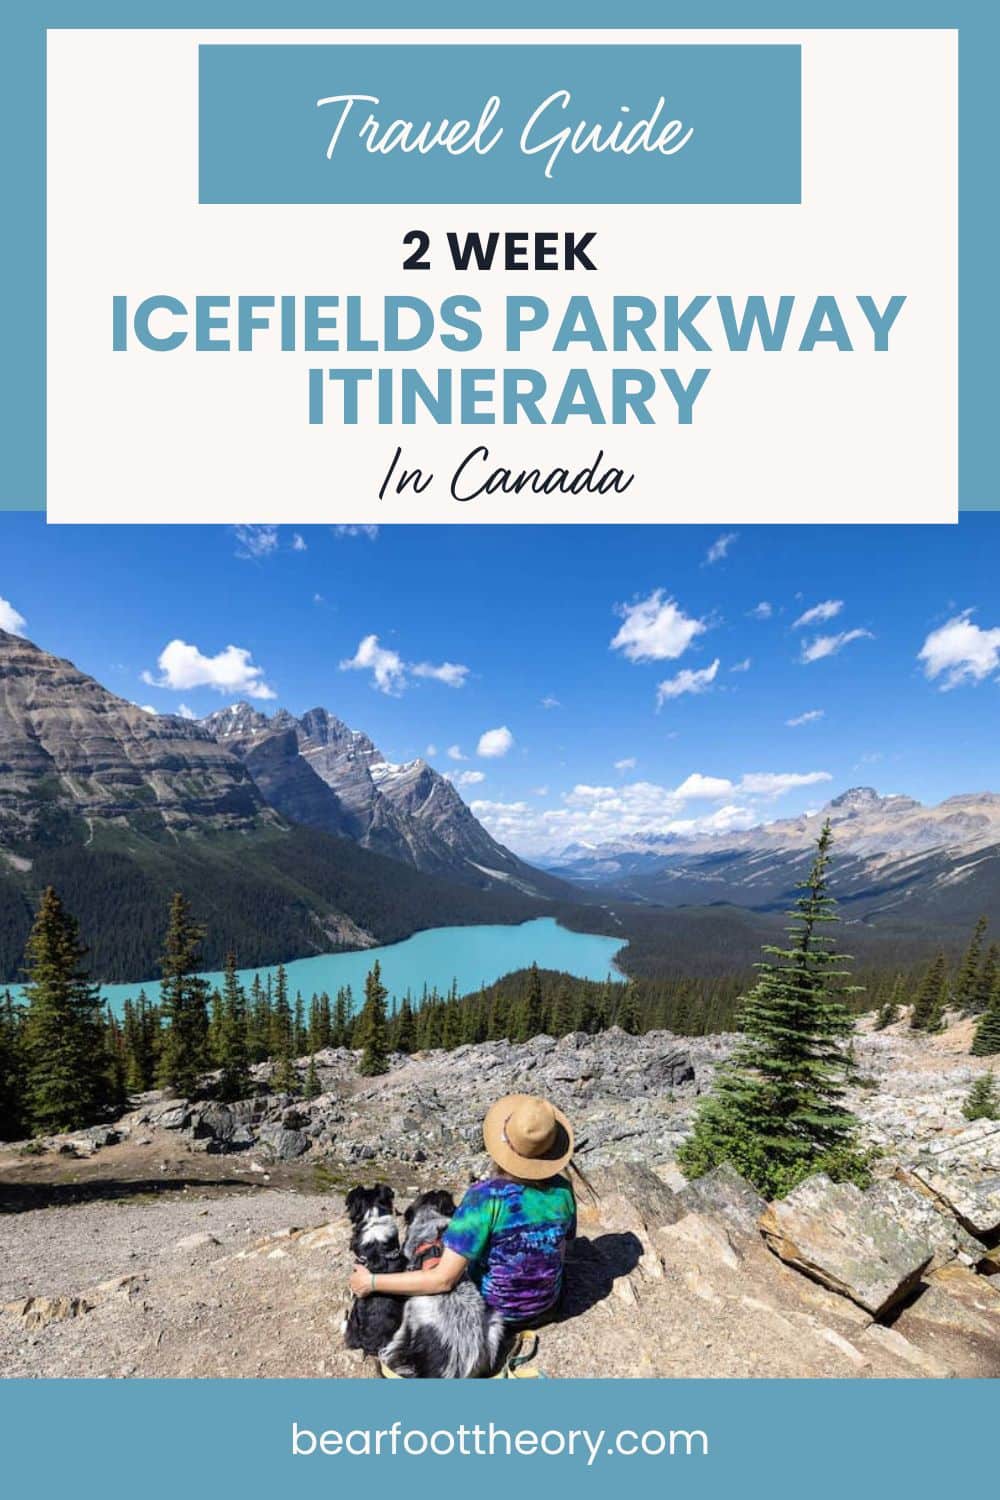 Discover the breathtaking beauty of Canada's Icefields Parkway with our comprehensive 2-week road trip itinerary. Our blog post takes you through pristine landscapes, glacial lakes, and towering mountain peaks. You'll explore hidden gems, top attractions, and local hikes along the route. Perfect for adventure seekers and nature lovers alike! Click for a detailed guide, complete with stunning visuals.